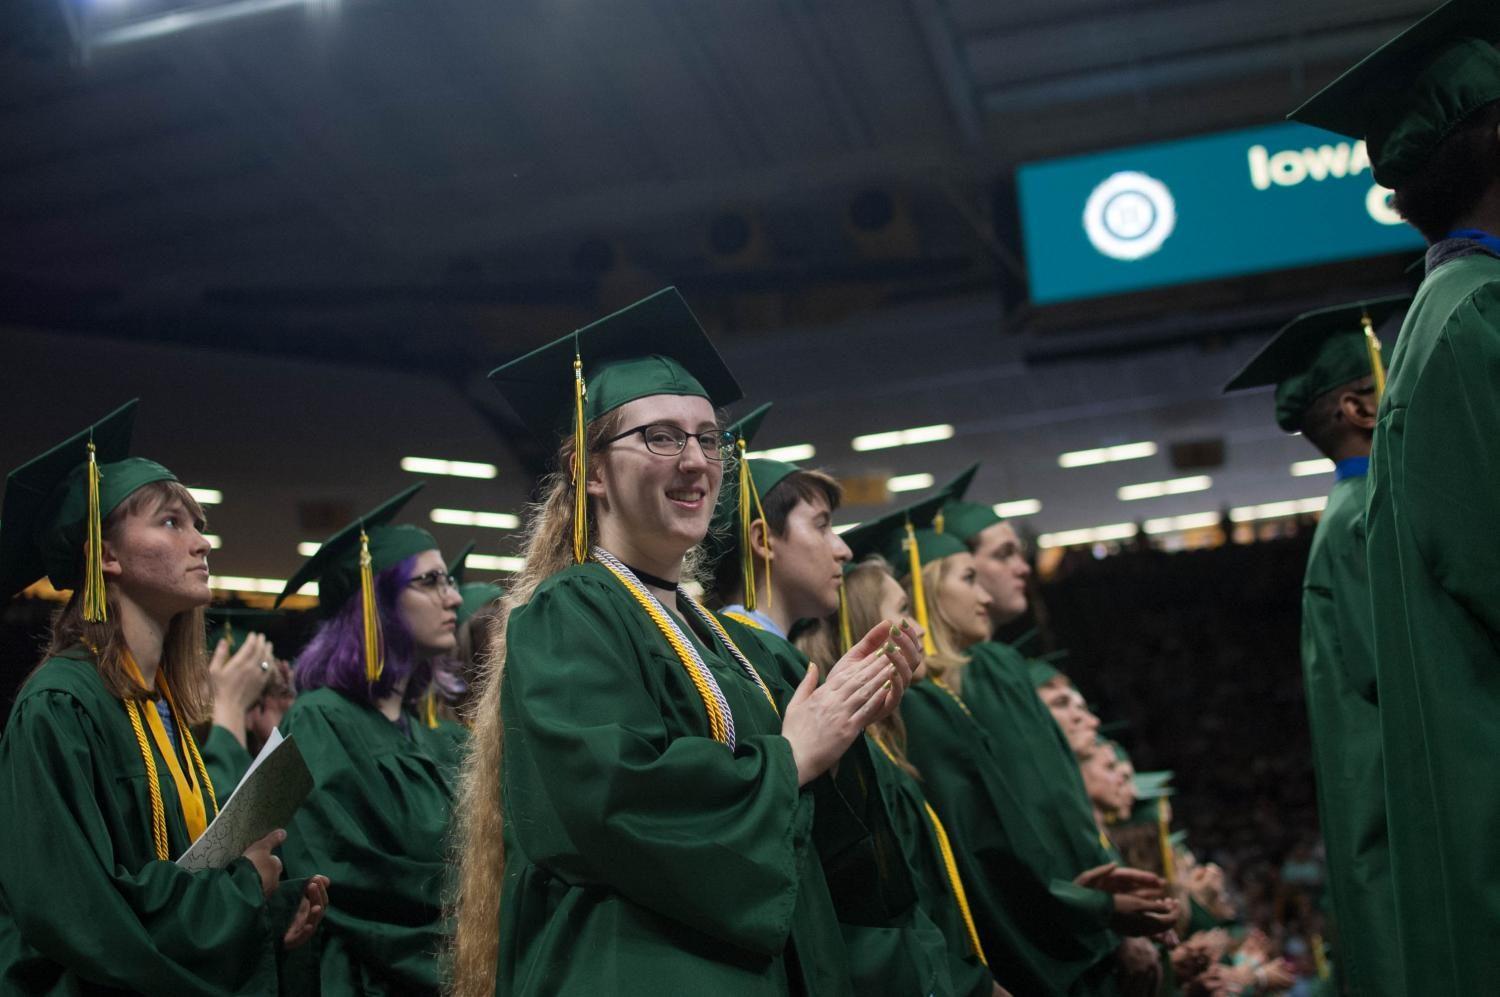 Nicole Ritchey 17 applauds during the West High commencement ceremony at Carver-Hawkeye Arena on May 27.